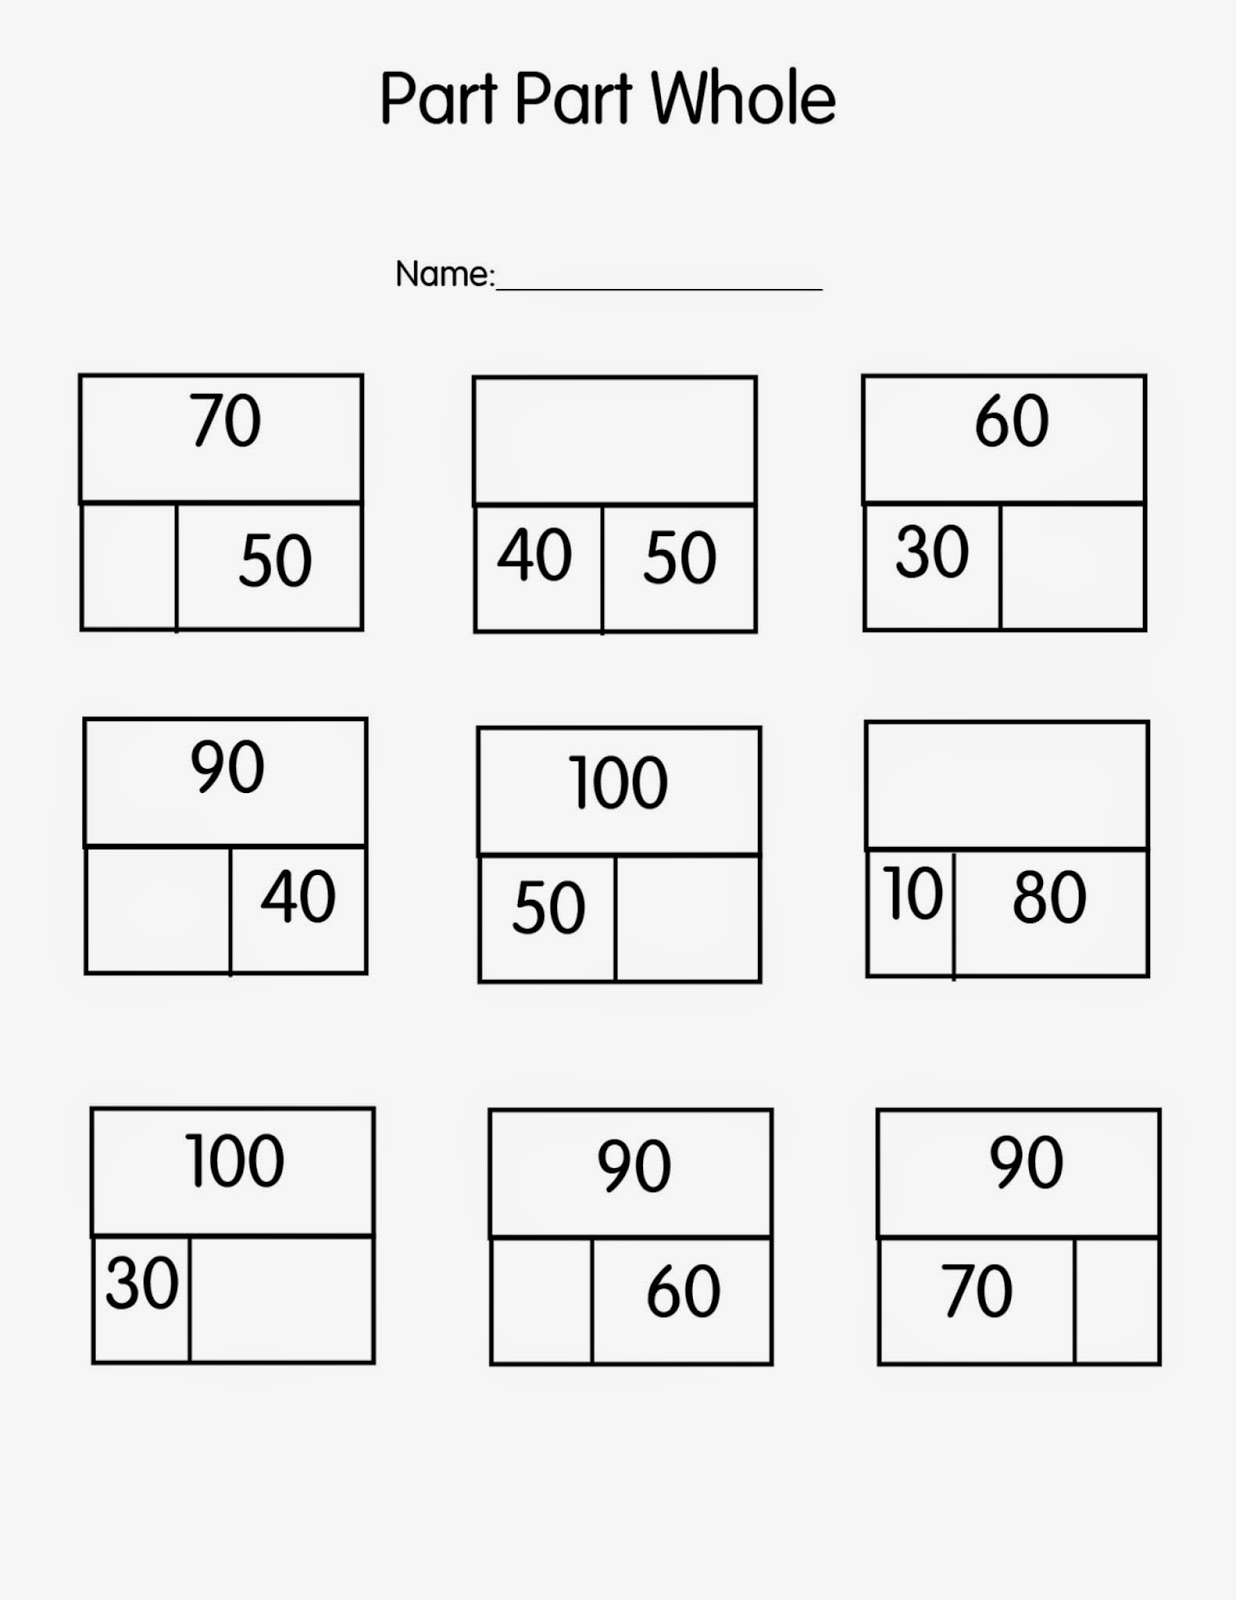 Parts of a Whole Worksheets First Grade Image